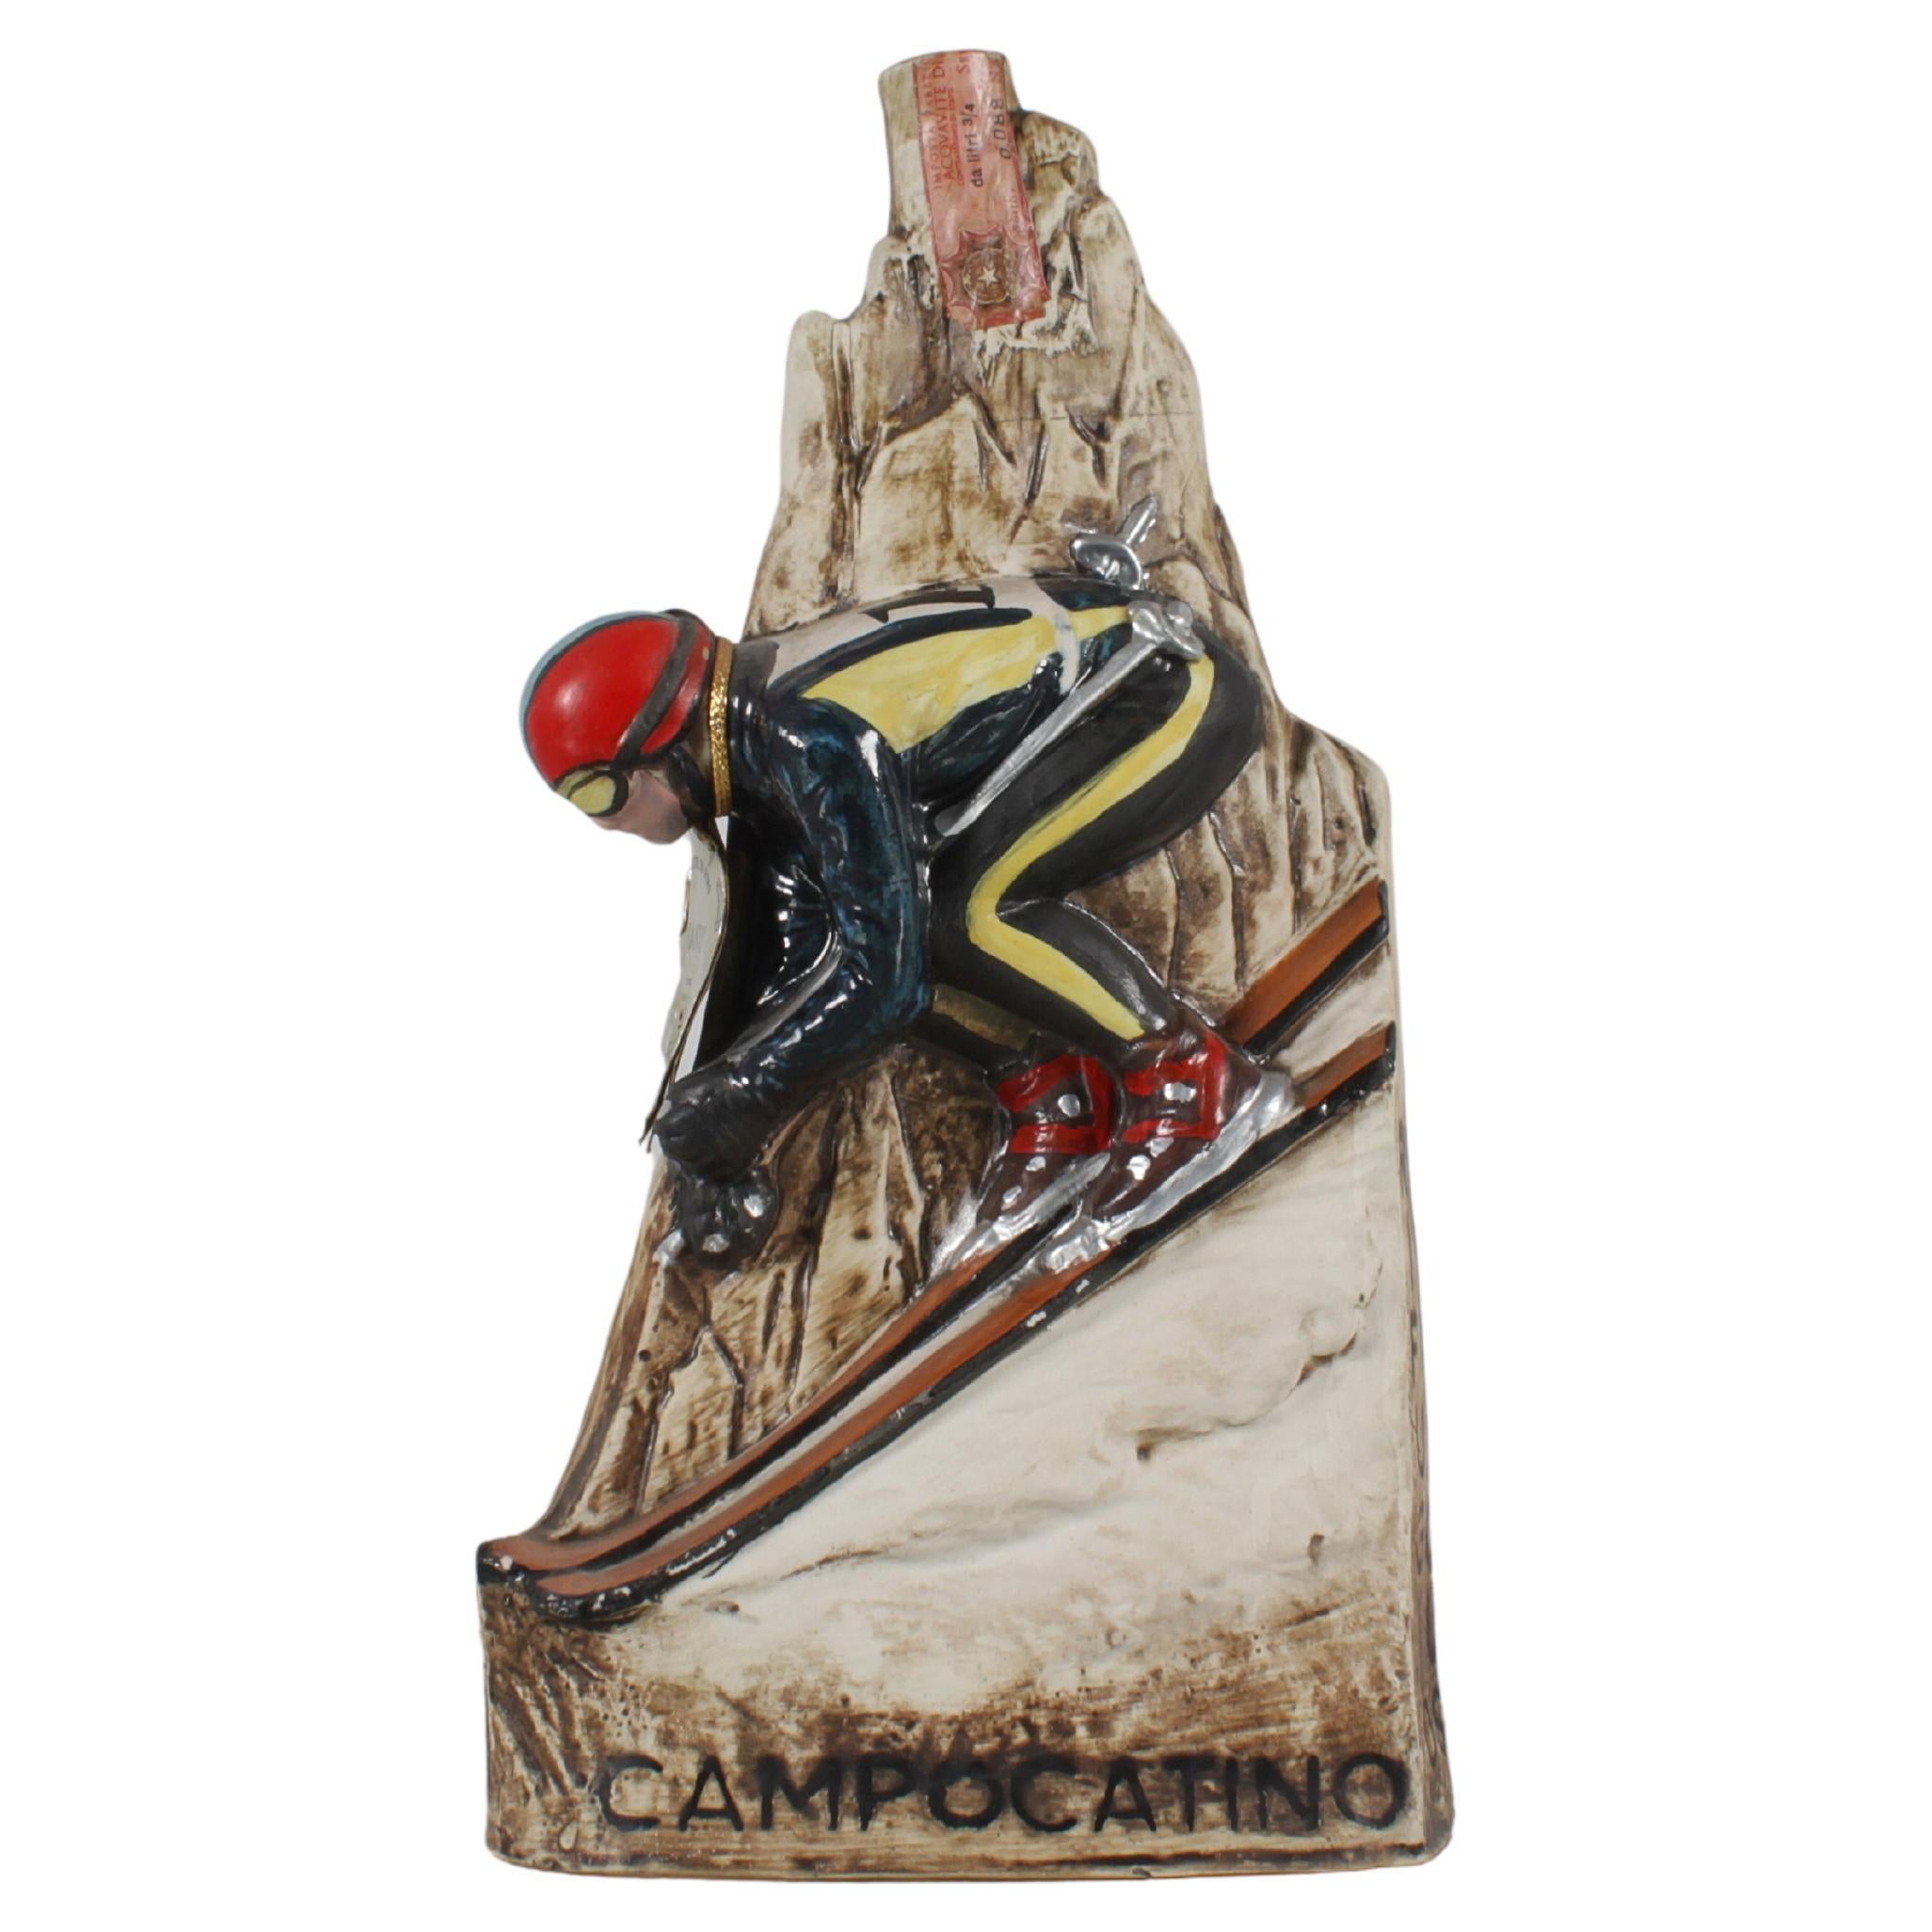 Rare bottle - hand-crafted and painted ceramic advertising sculpture, depicting a skier on a mountain peak. Brandy - 